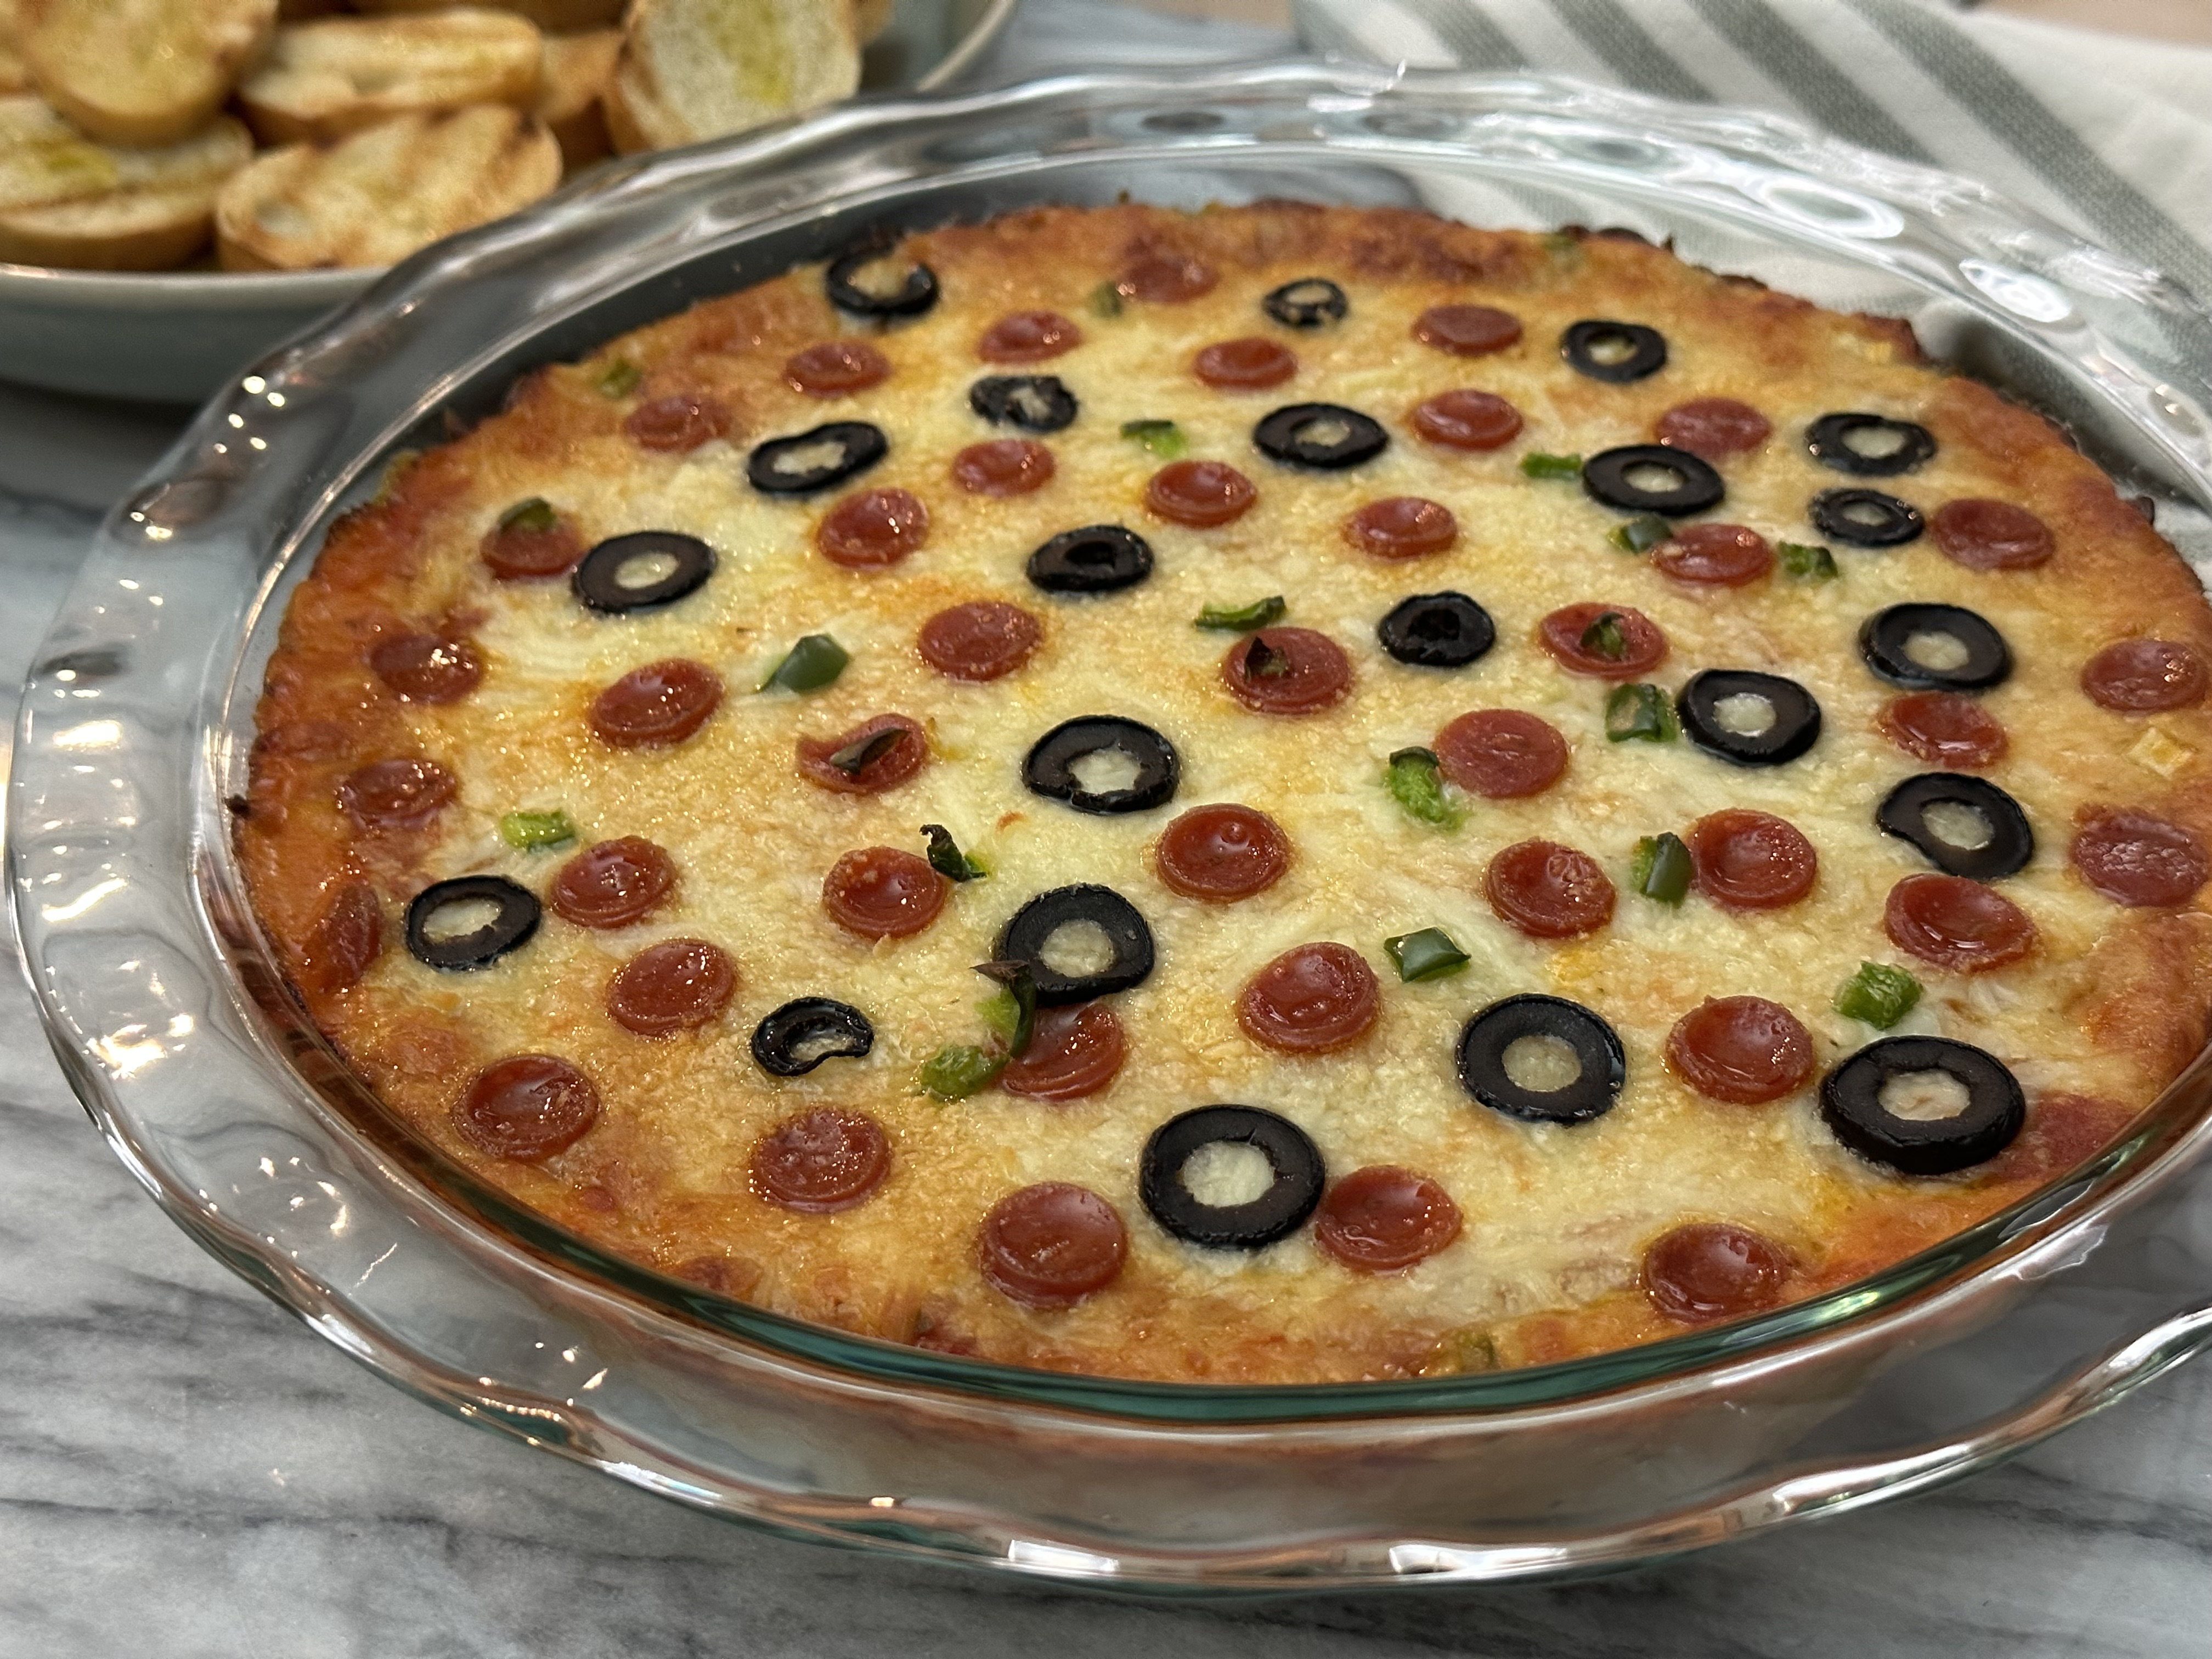 Hot Pizza Dip in a clear glass pan with toasted bread on a plate.